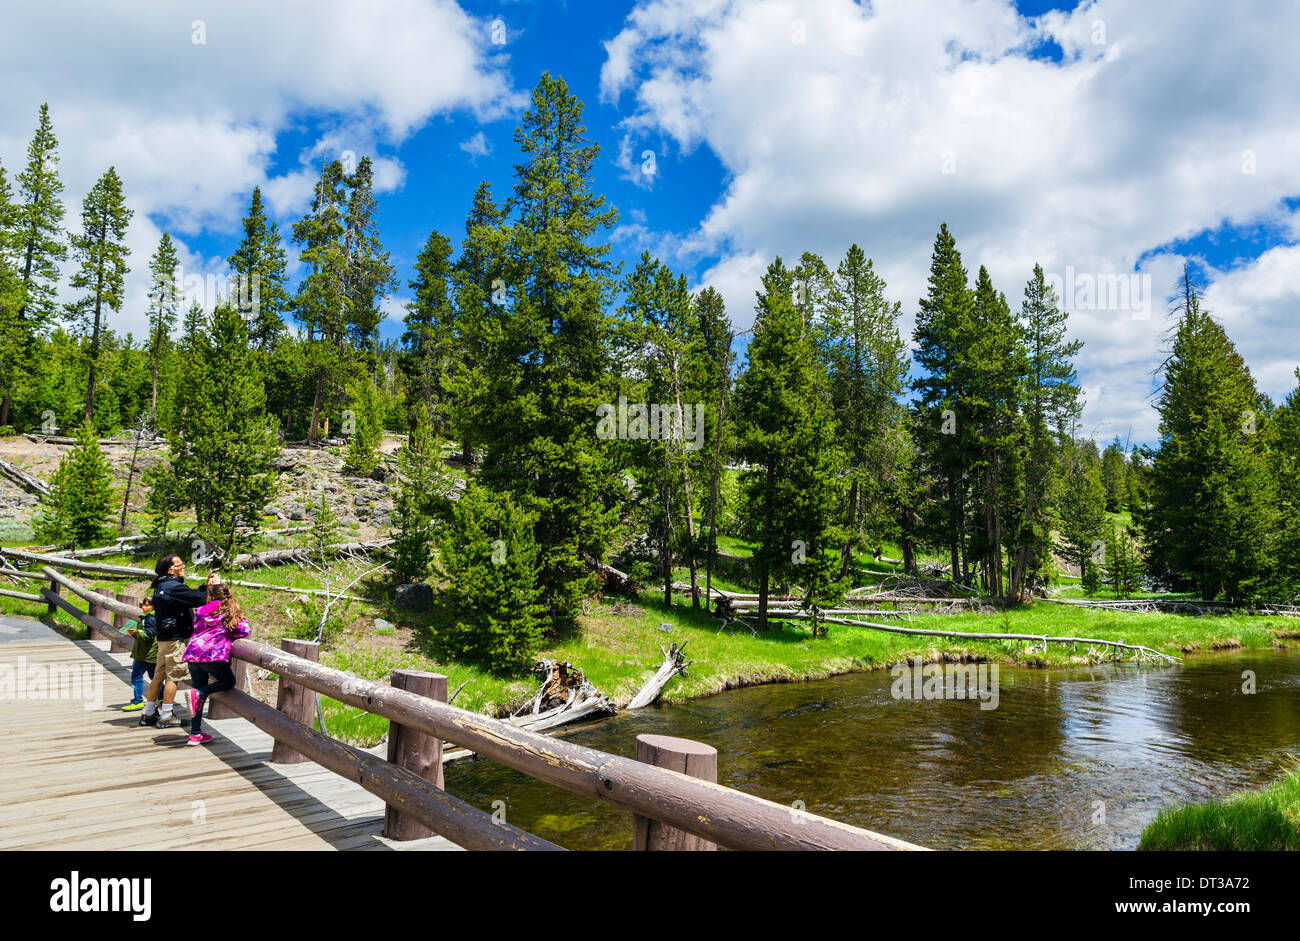 Bridge over the Firehole River on the Geyser Hill trail, Upper Geyser Basin, Yellowstone National Park, Wyoming, USA Stock Photo